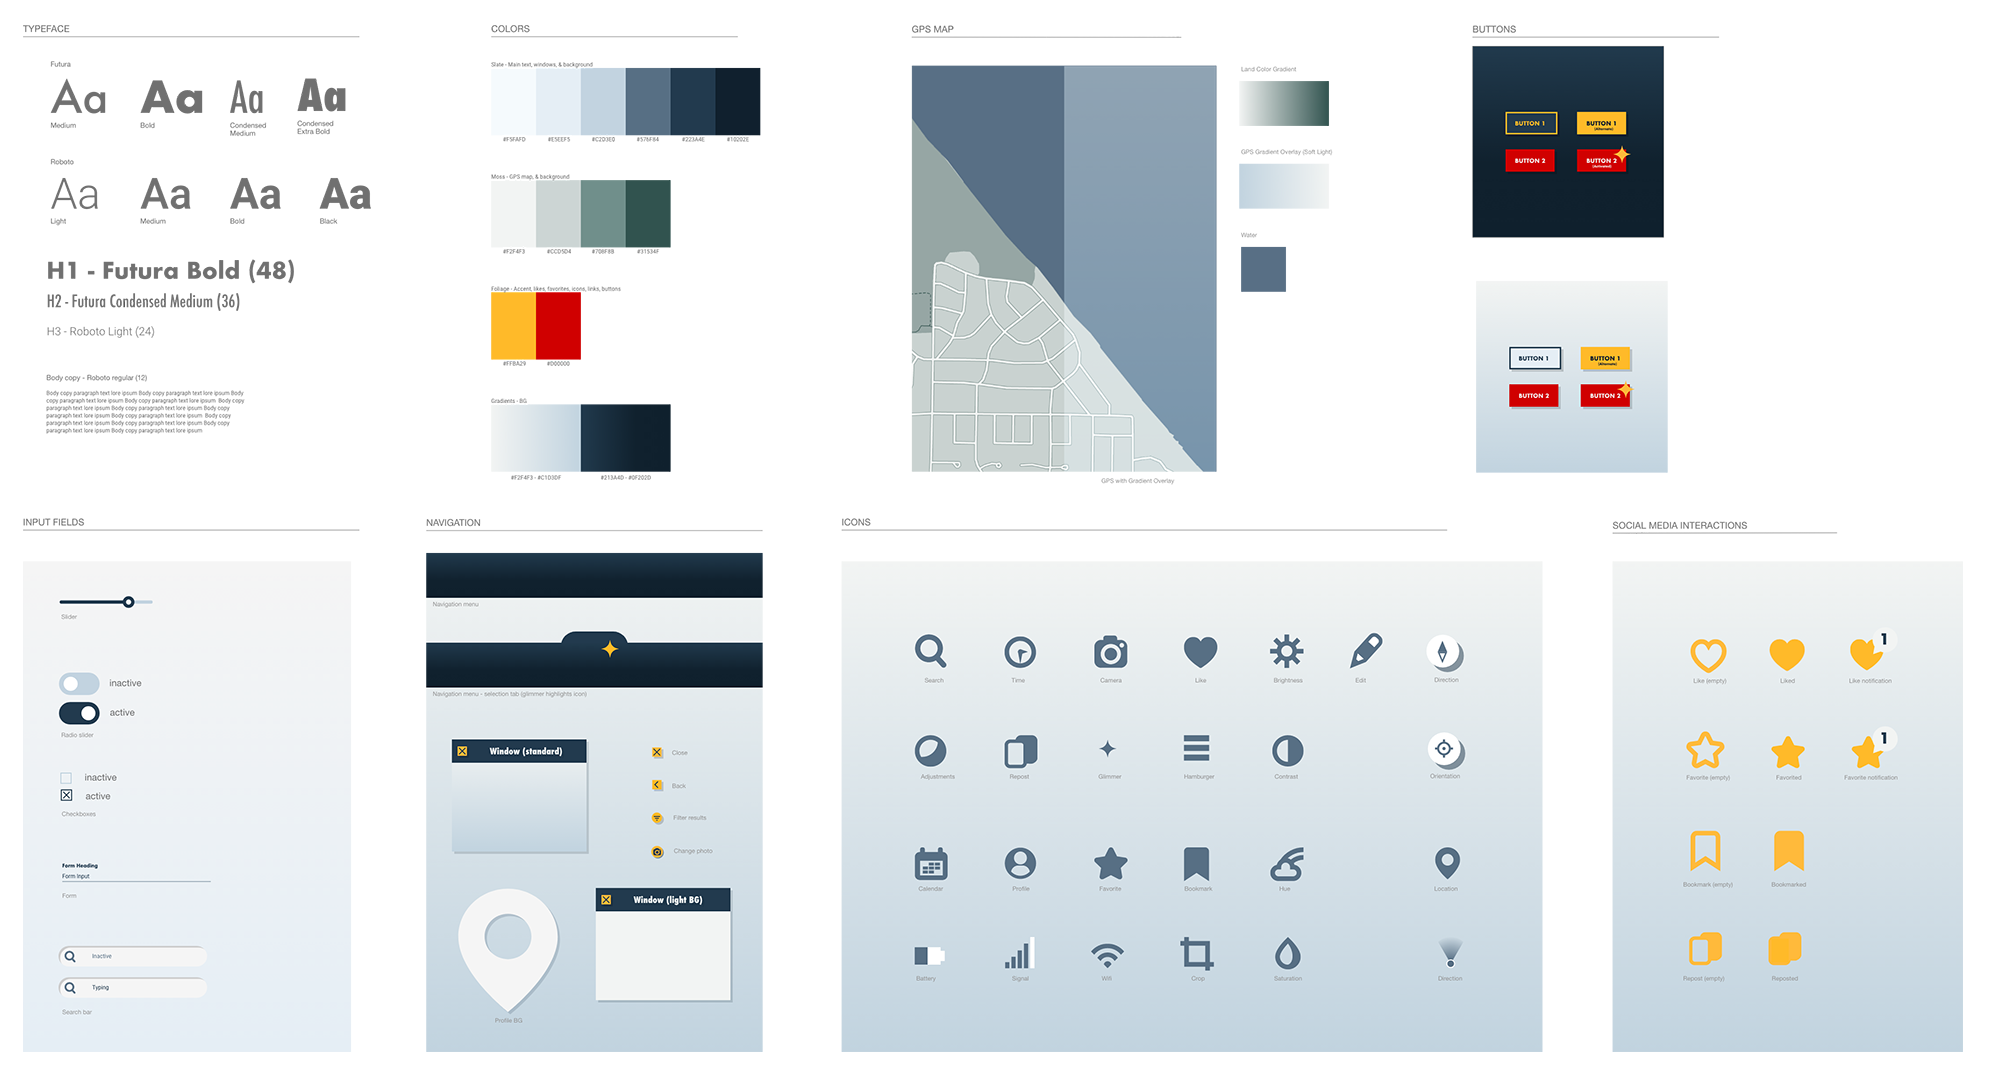 grid of icons, colors, inputs, and type